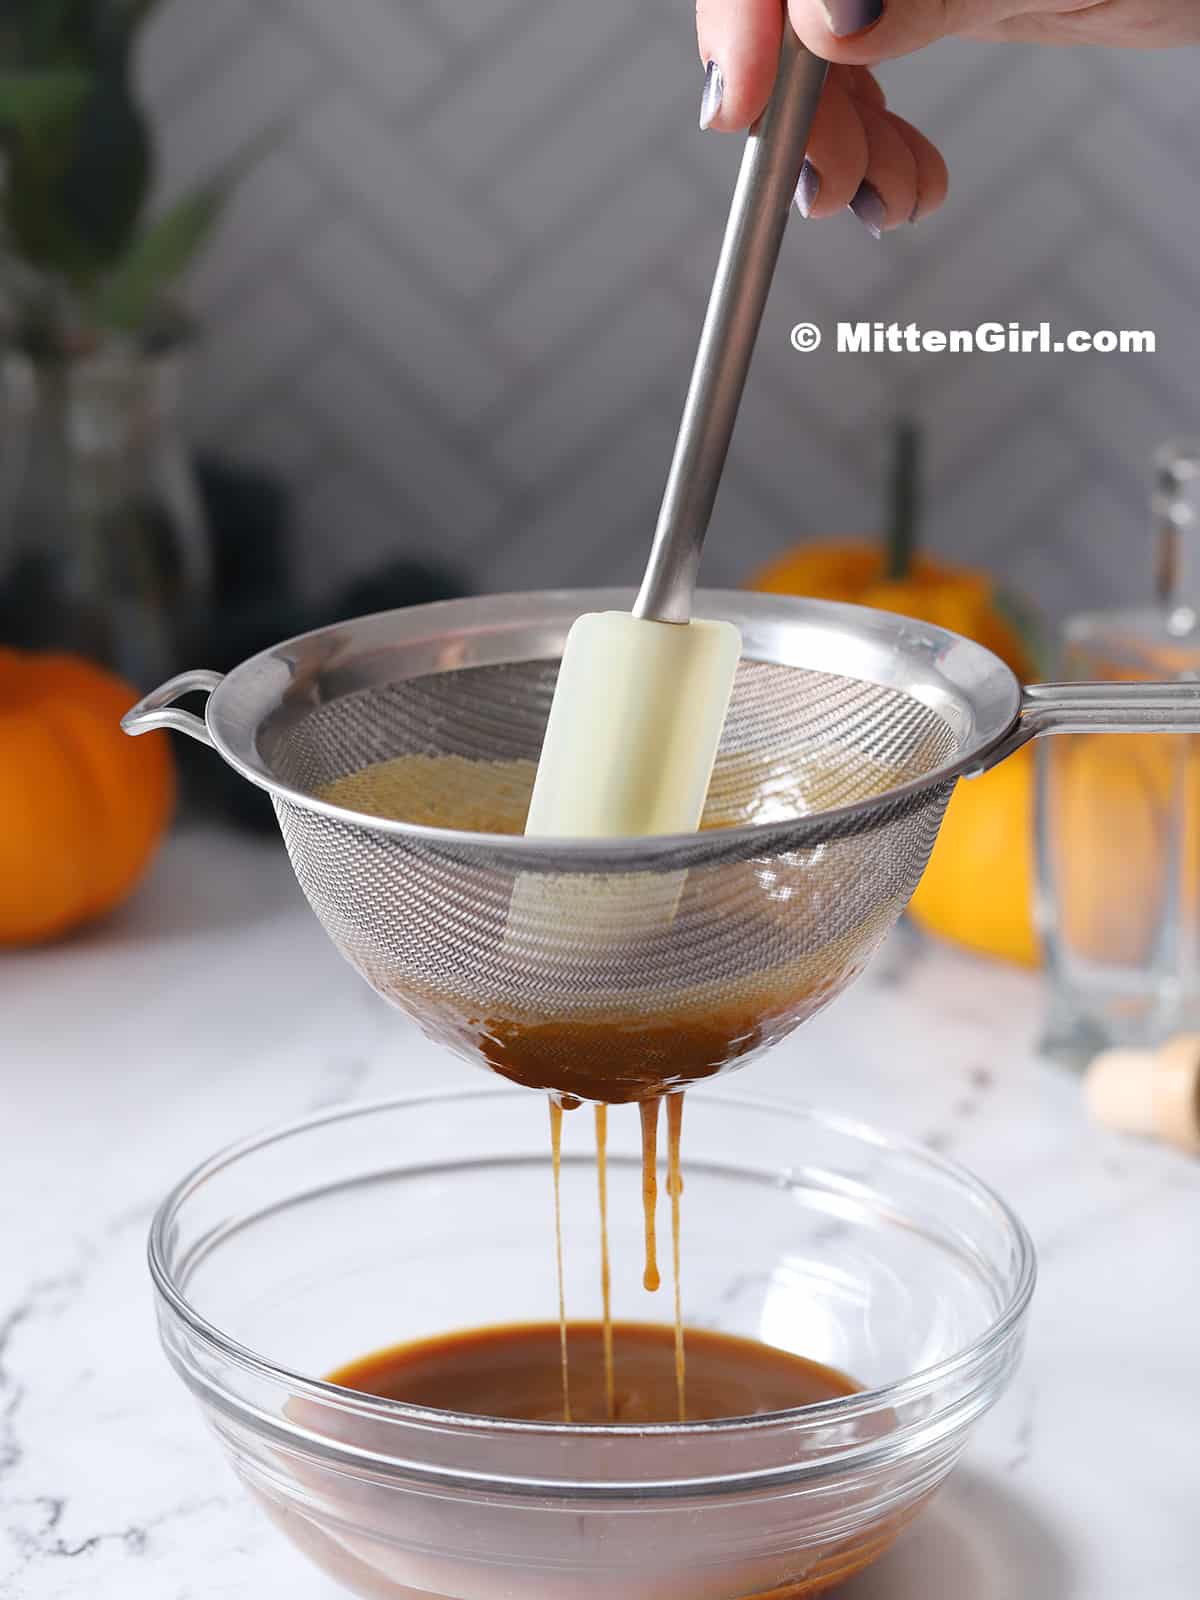 A hand stirring a spatula in a strainer of syrup held over a bowl.